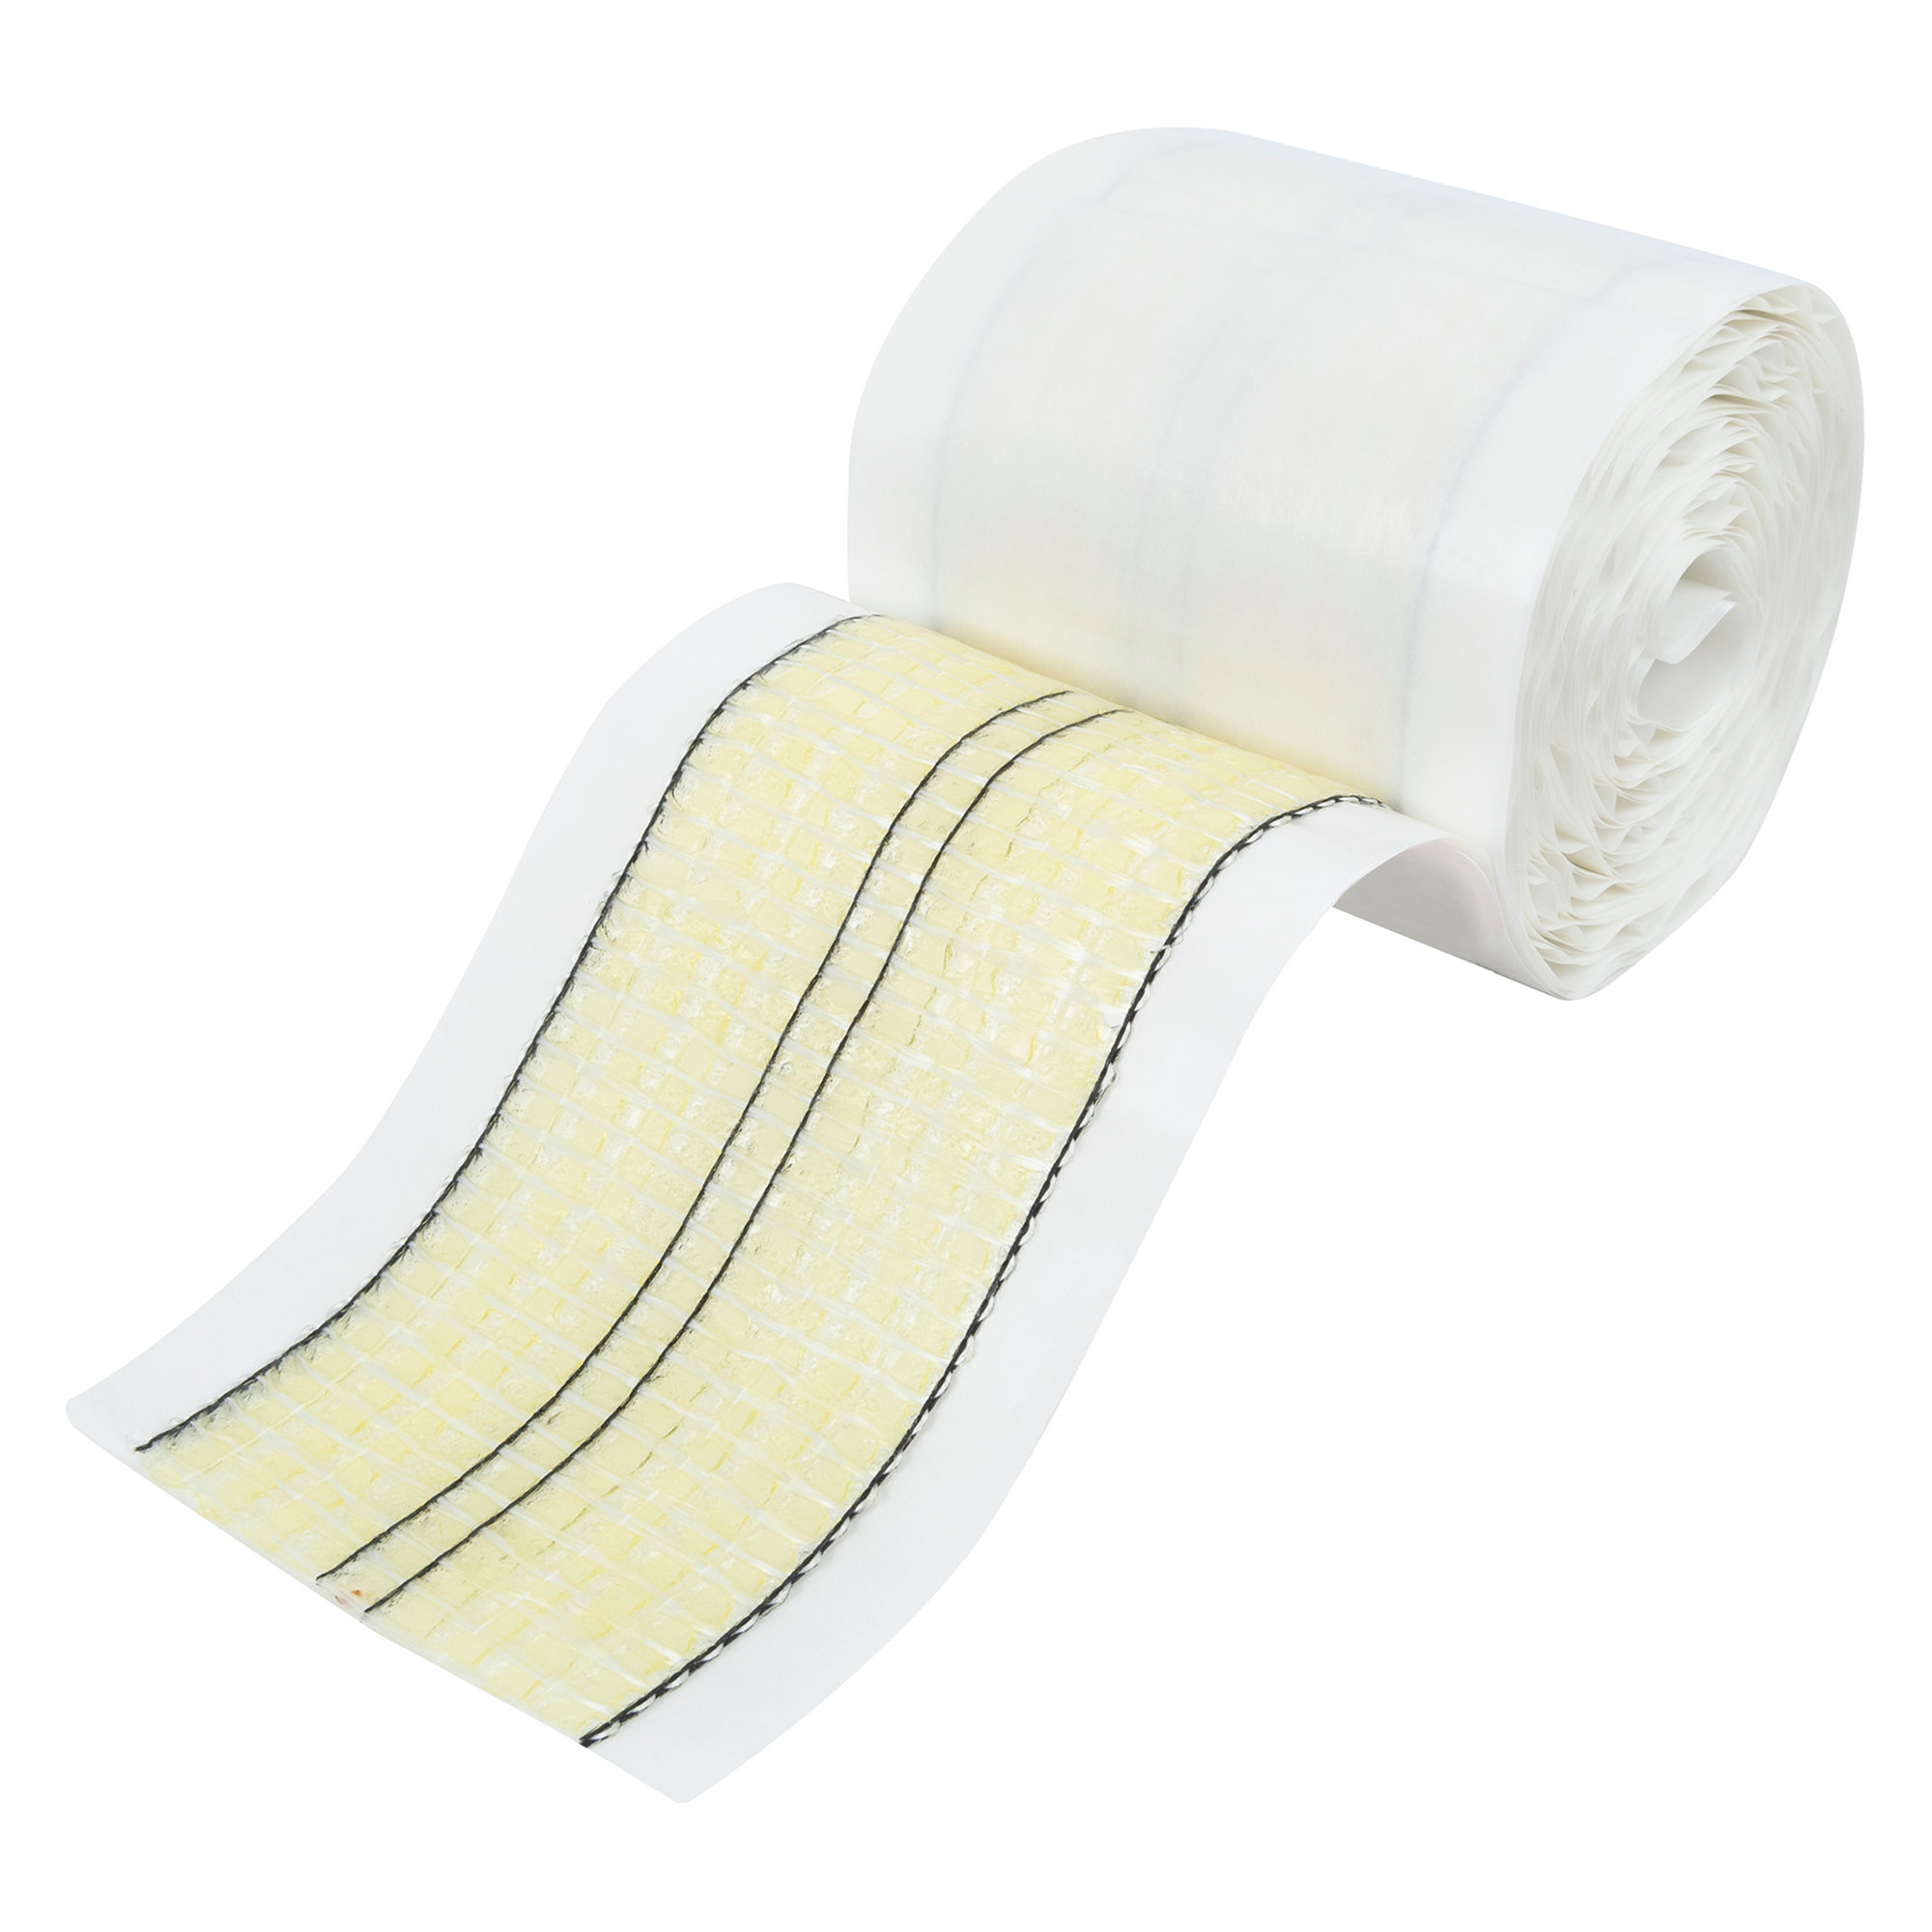 Double-Sided Seam Tape